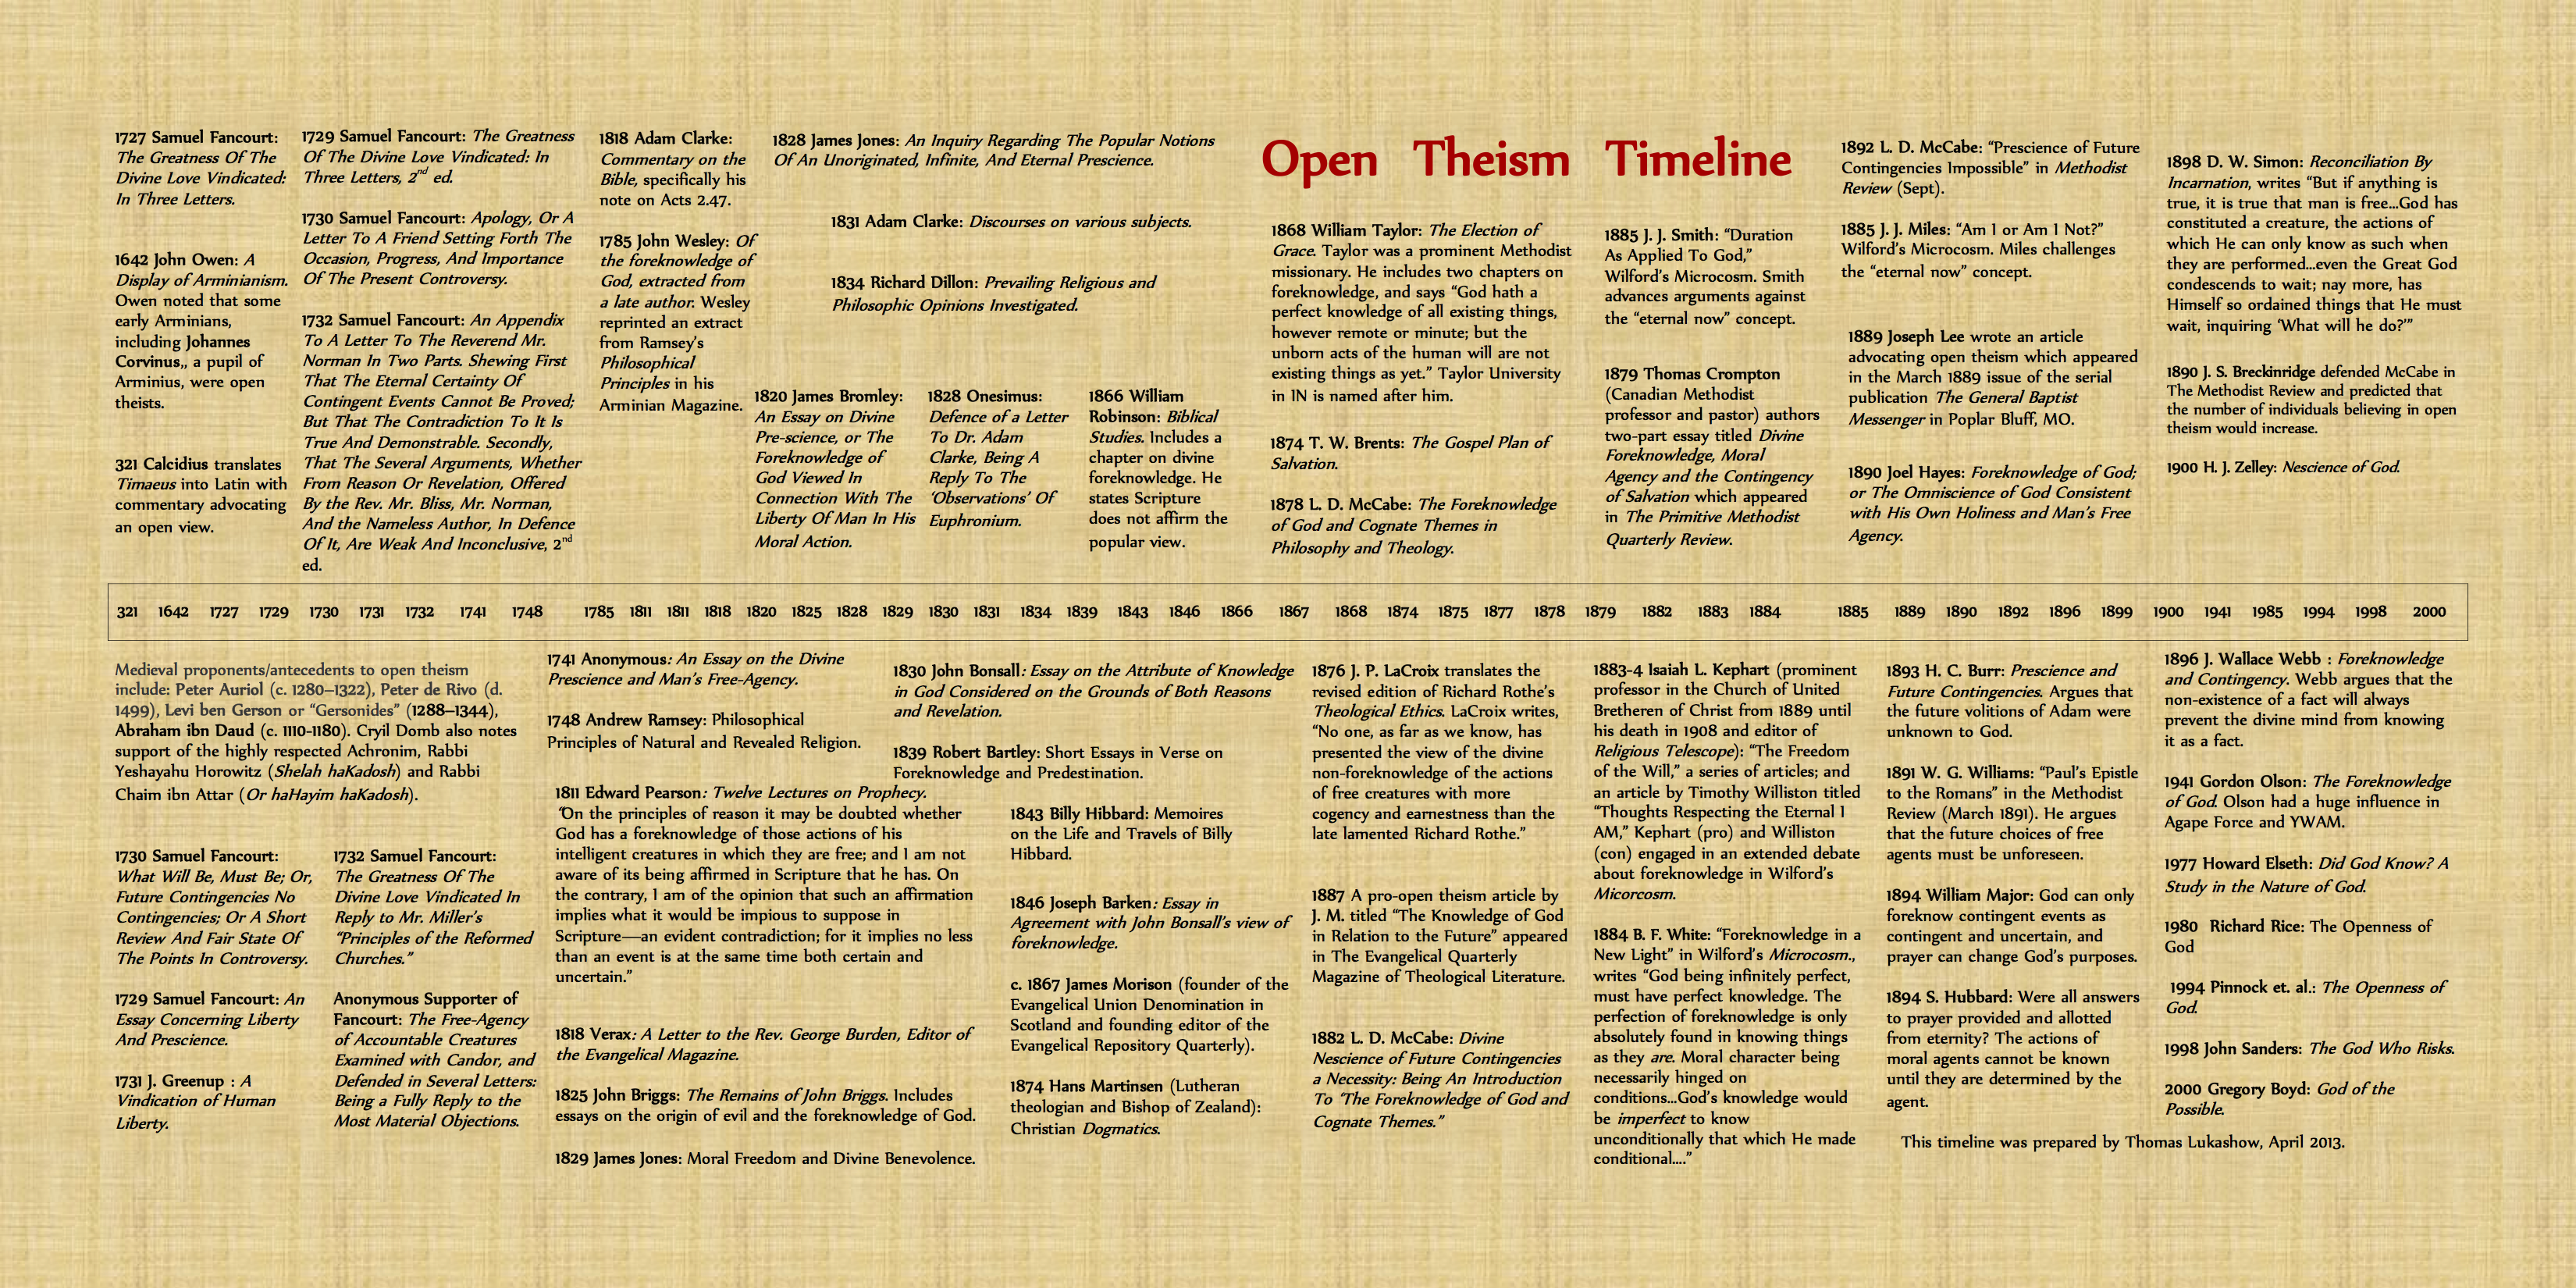 Open Theism Timeline